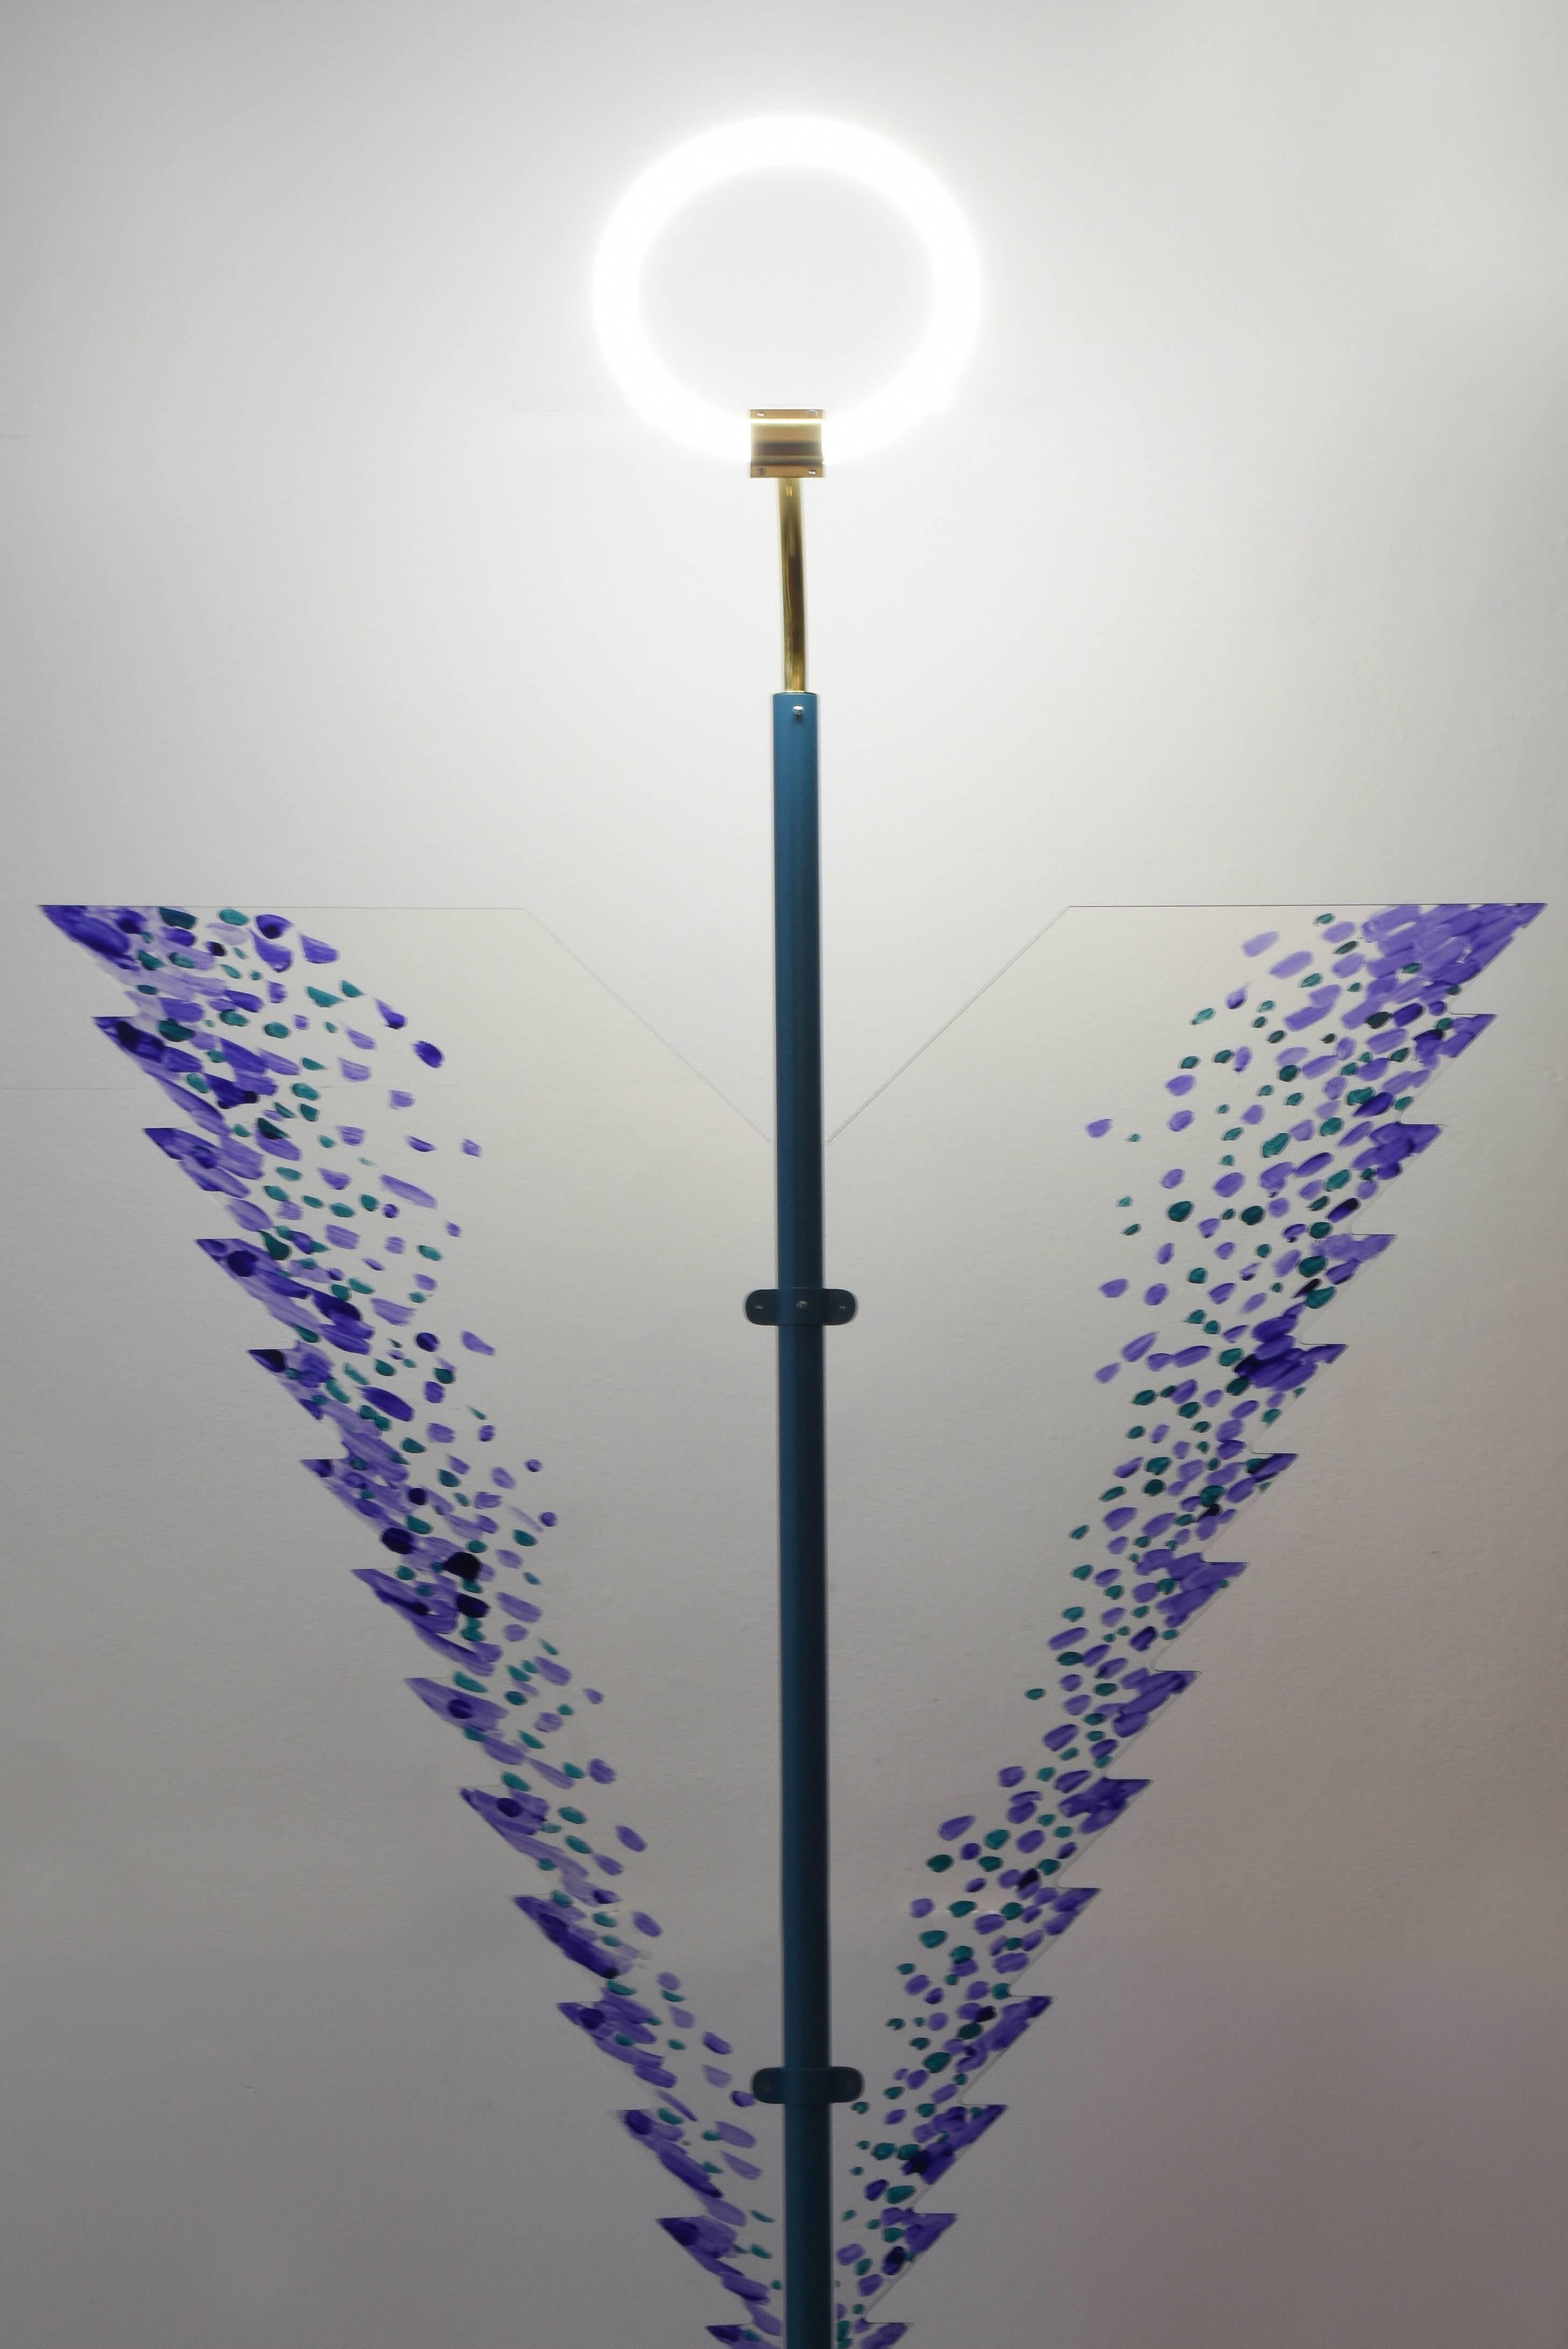 Designed by Ugo La Pietra, floor lamp in lacquered metal, lamp holder in polished brass, transparent acrylic sheets hand-painted by the artist. Florescent lamp 32 Watt. Lumen Center Edition, 1977-2007.
Signed wing: Ugo La Pietra